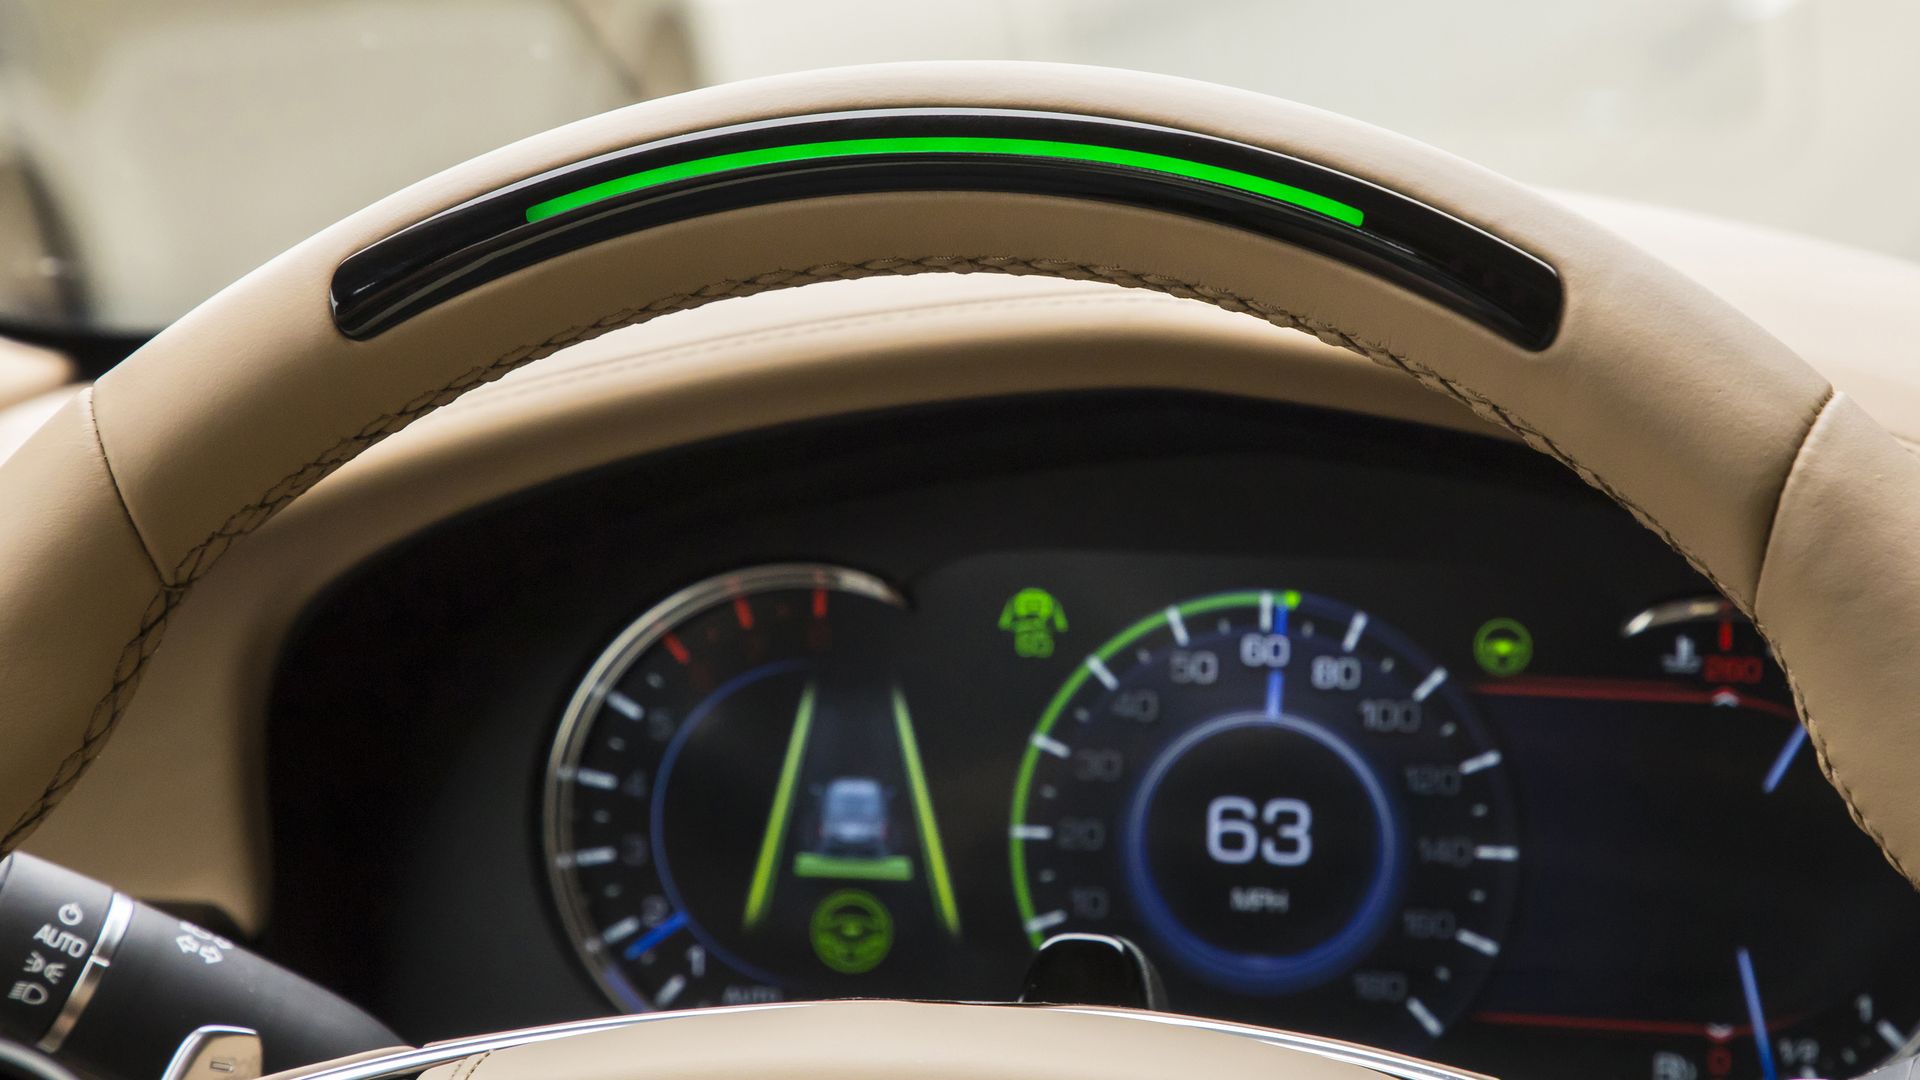 Image of Cadillac CT6 with Super Cruise hands-off highway driving system